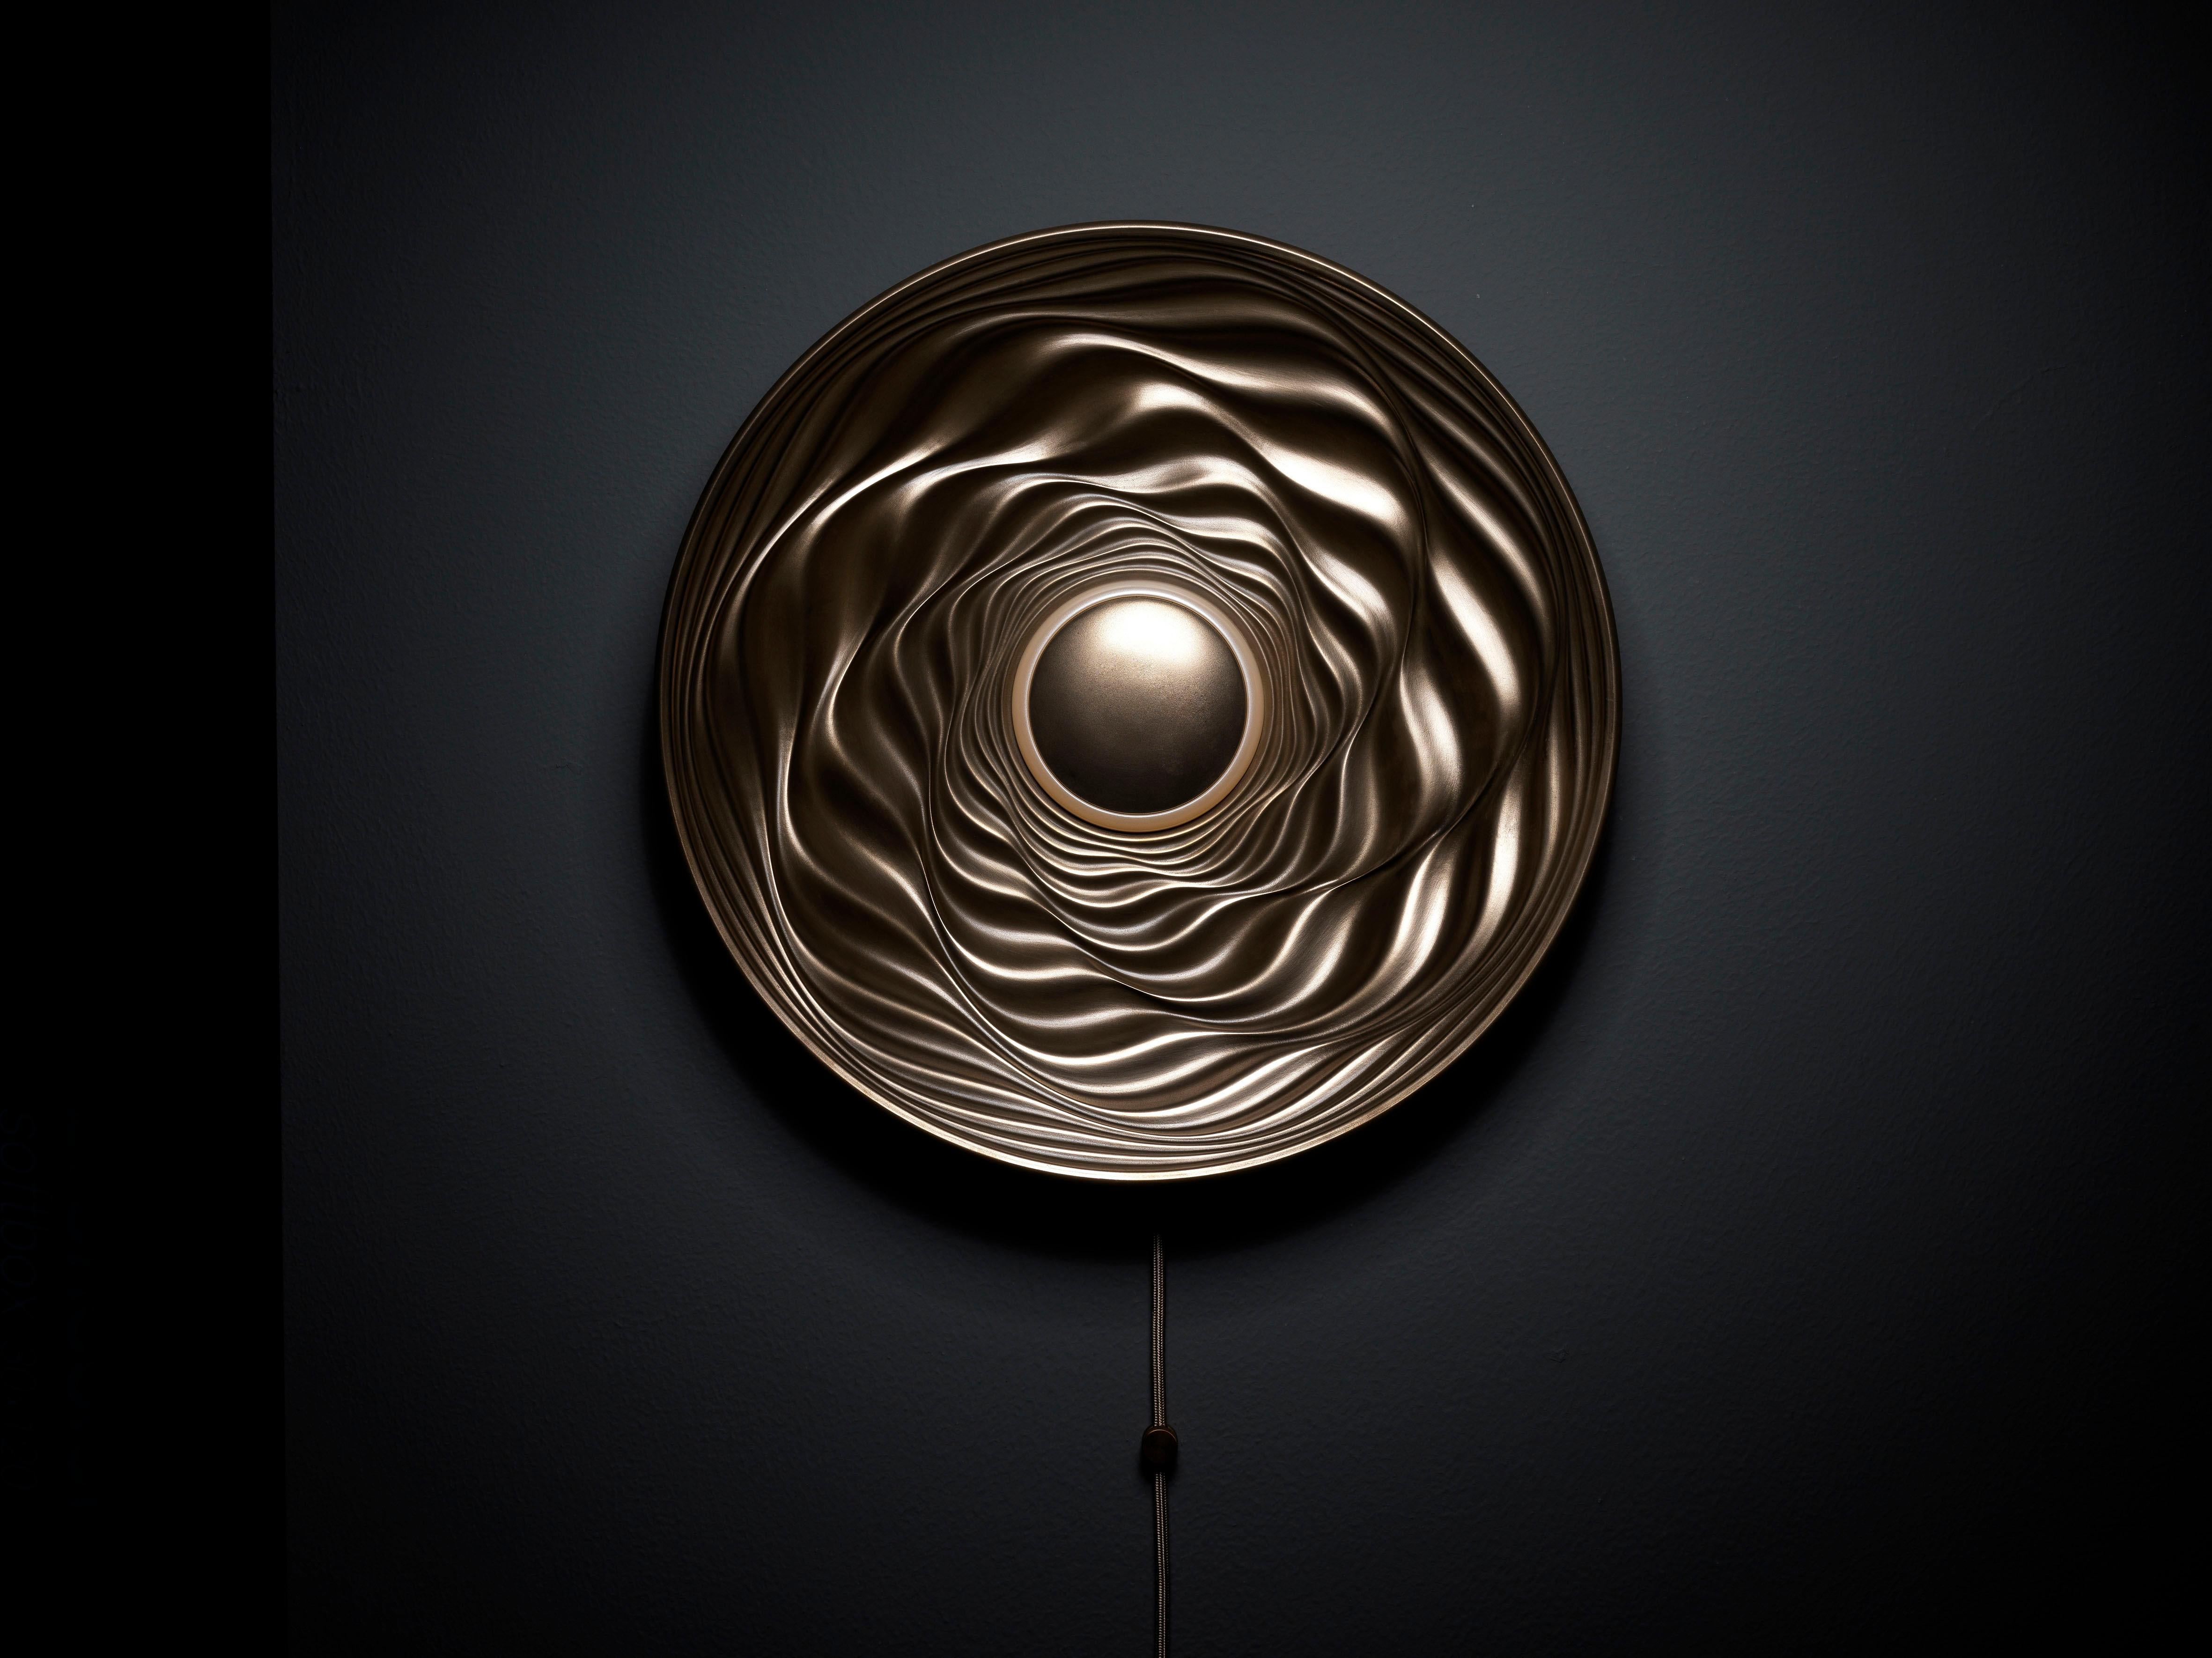 Transmission is limited edition, illuminated wall mounted sculpture which creates different effects depending on the use of its integral lighting, external illumination or both.

By day, the piece has a distinctive character where surface